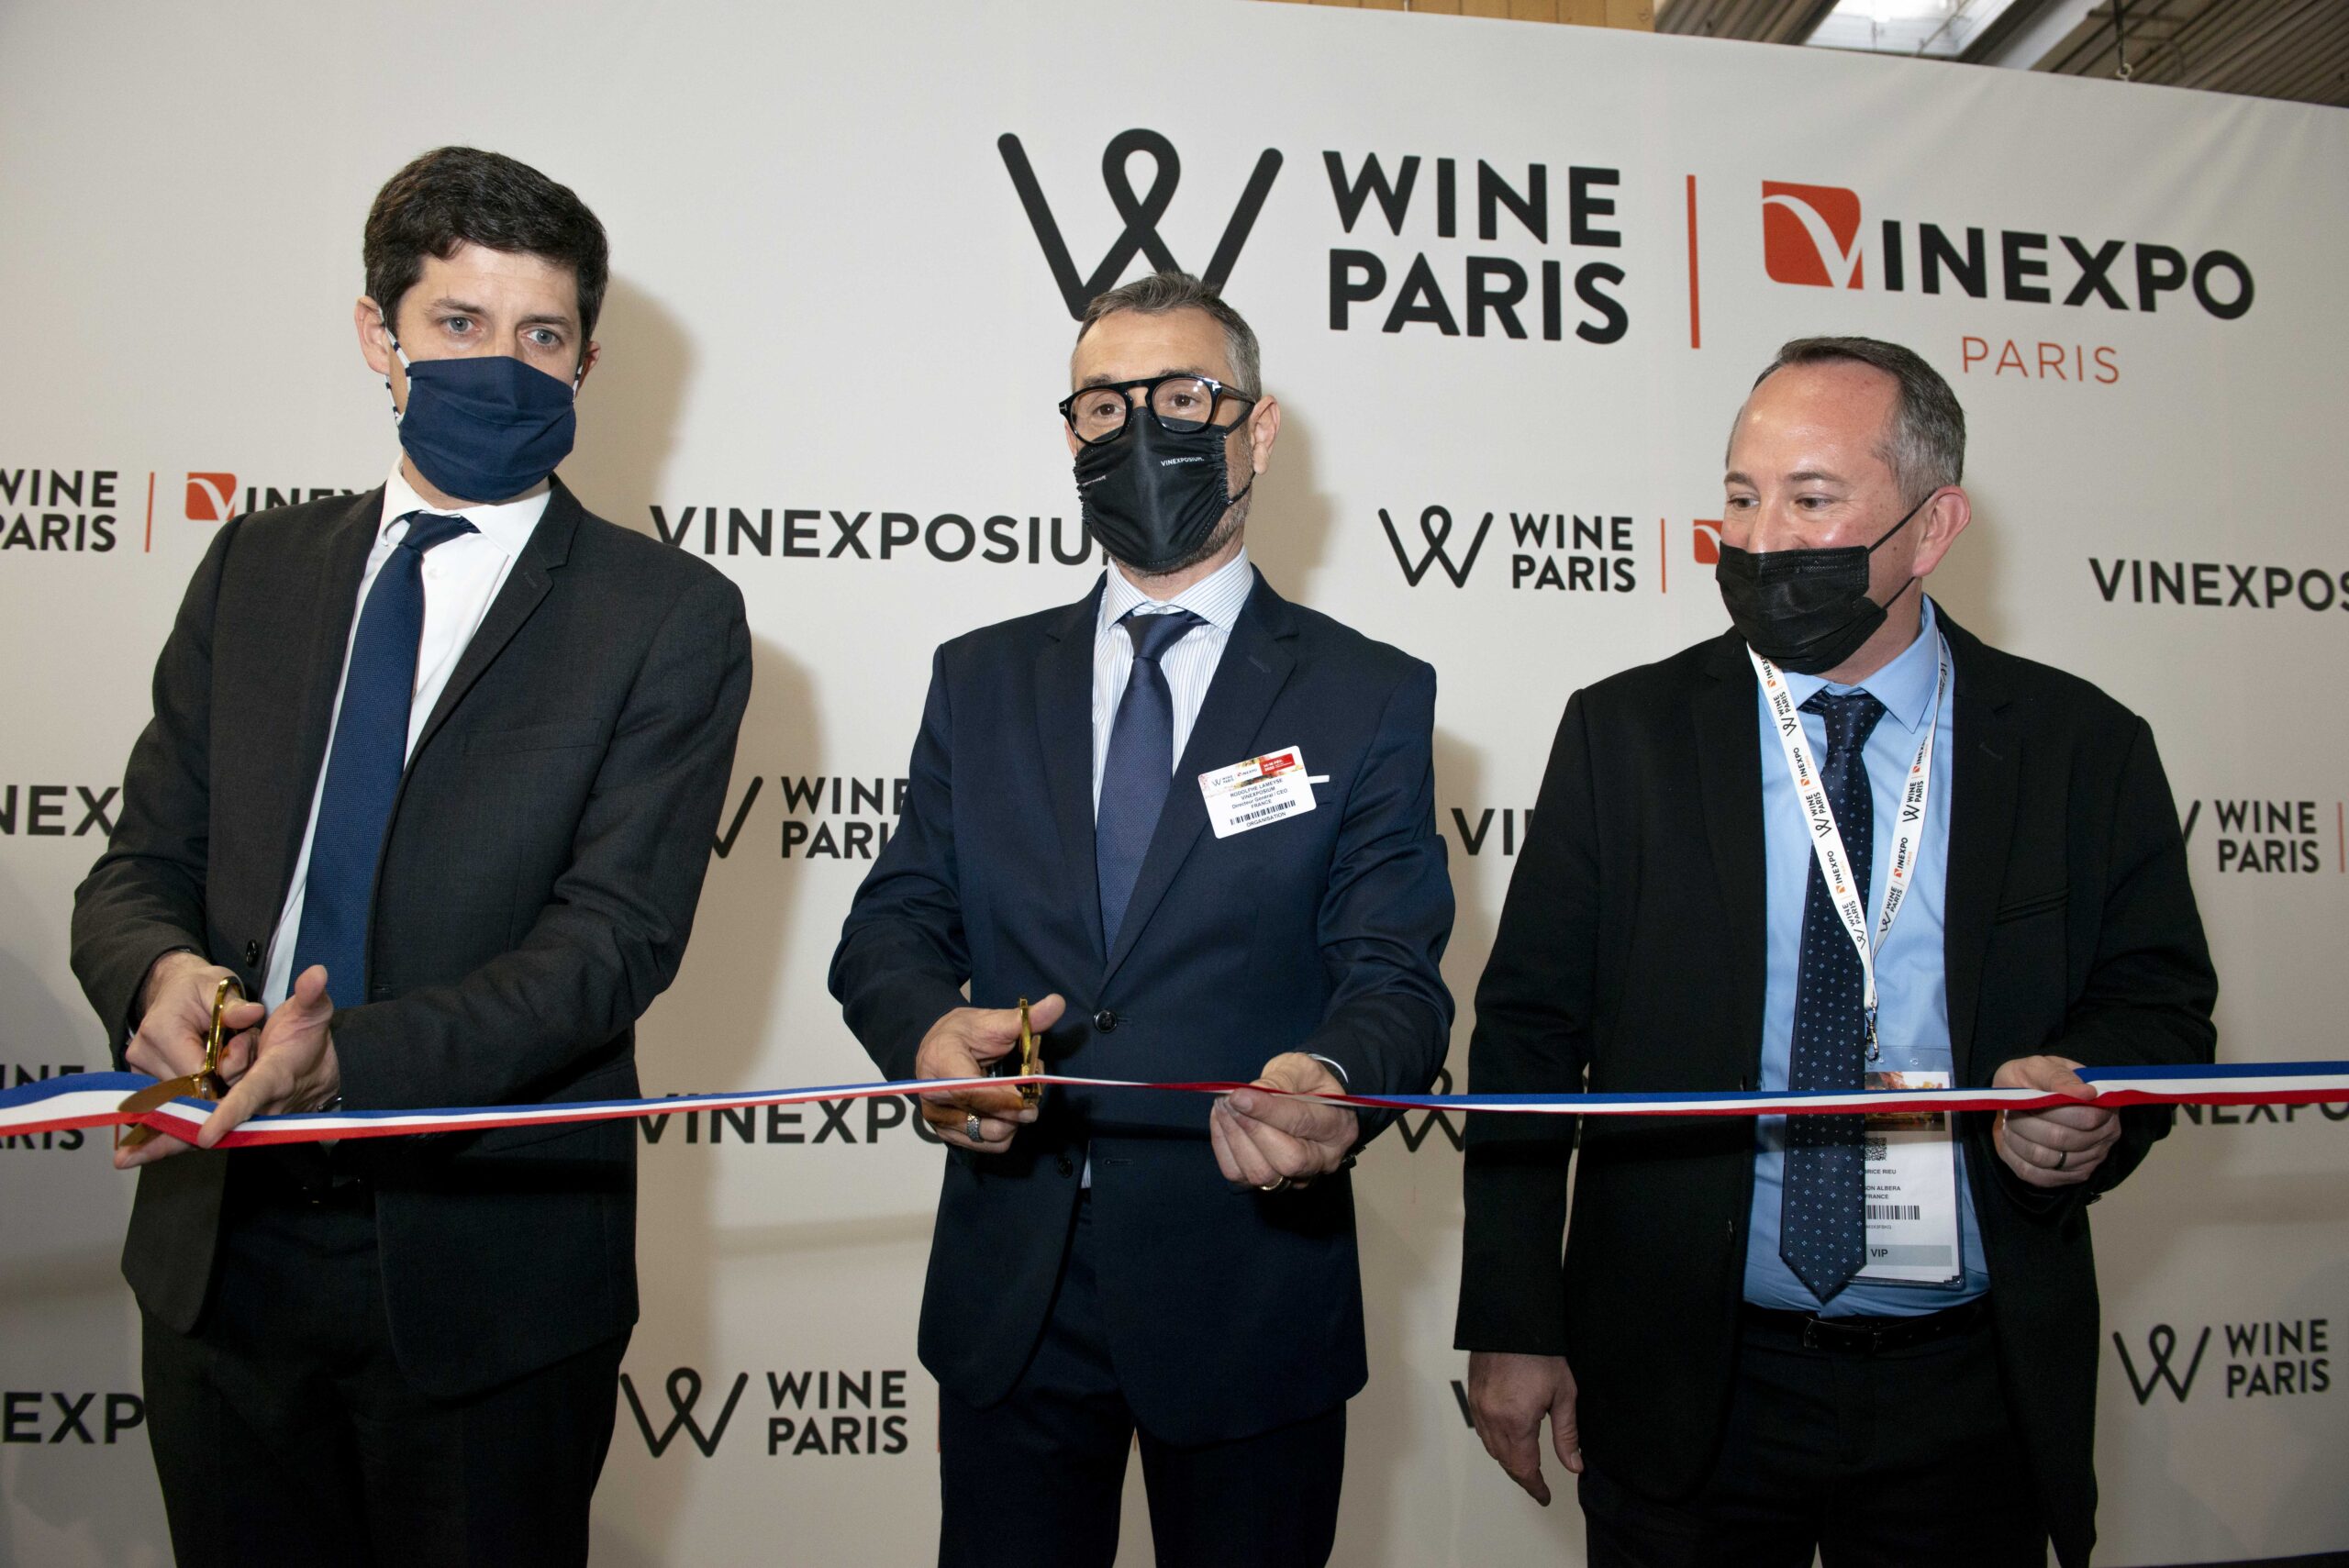 WINE PARIS & VINEXPO PARIS 2022,A STRONG MESSAGE FOR THE INDUSTRY